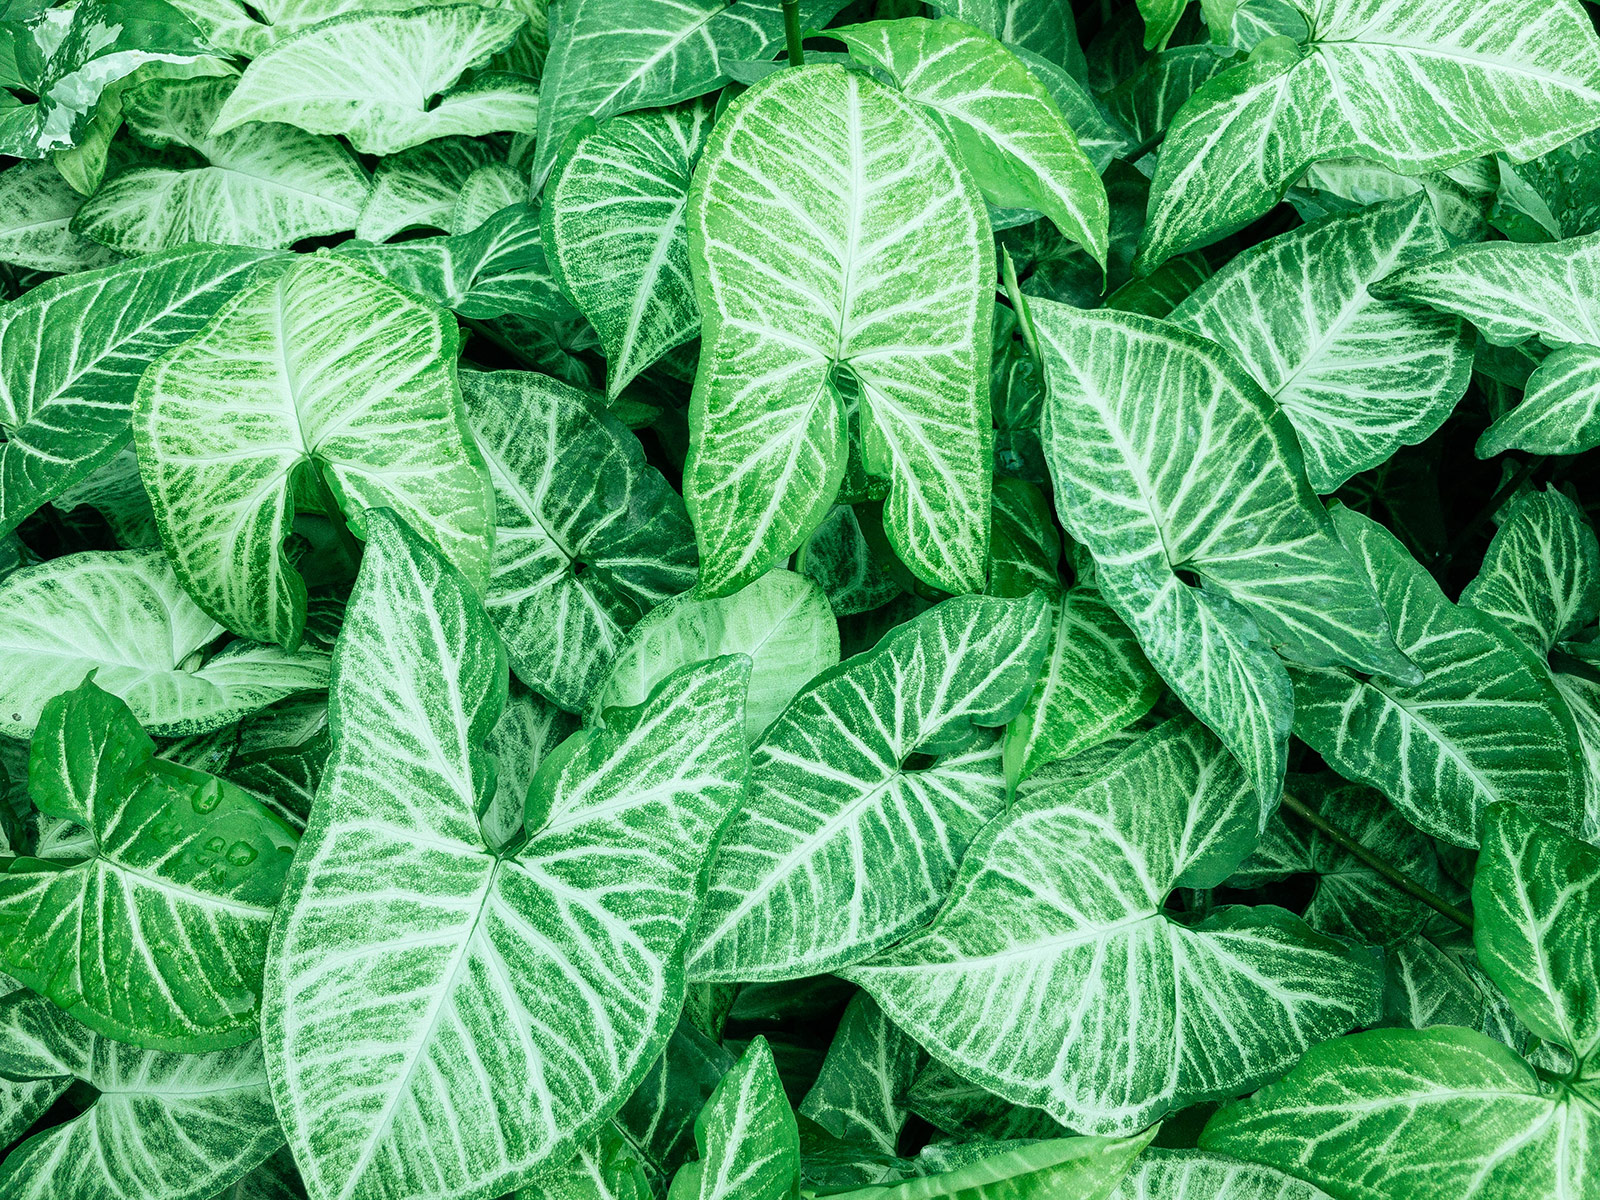 Overhead shot of a cluster of green and white Syngonium podophyllum foliage